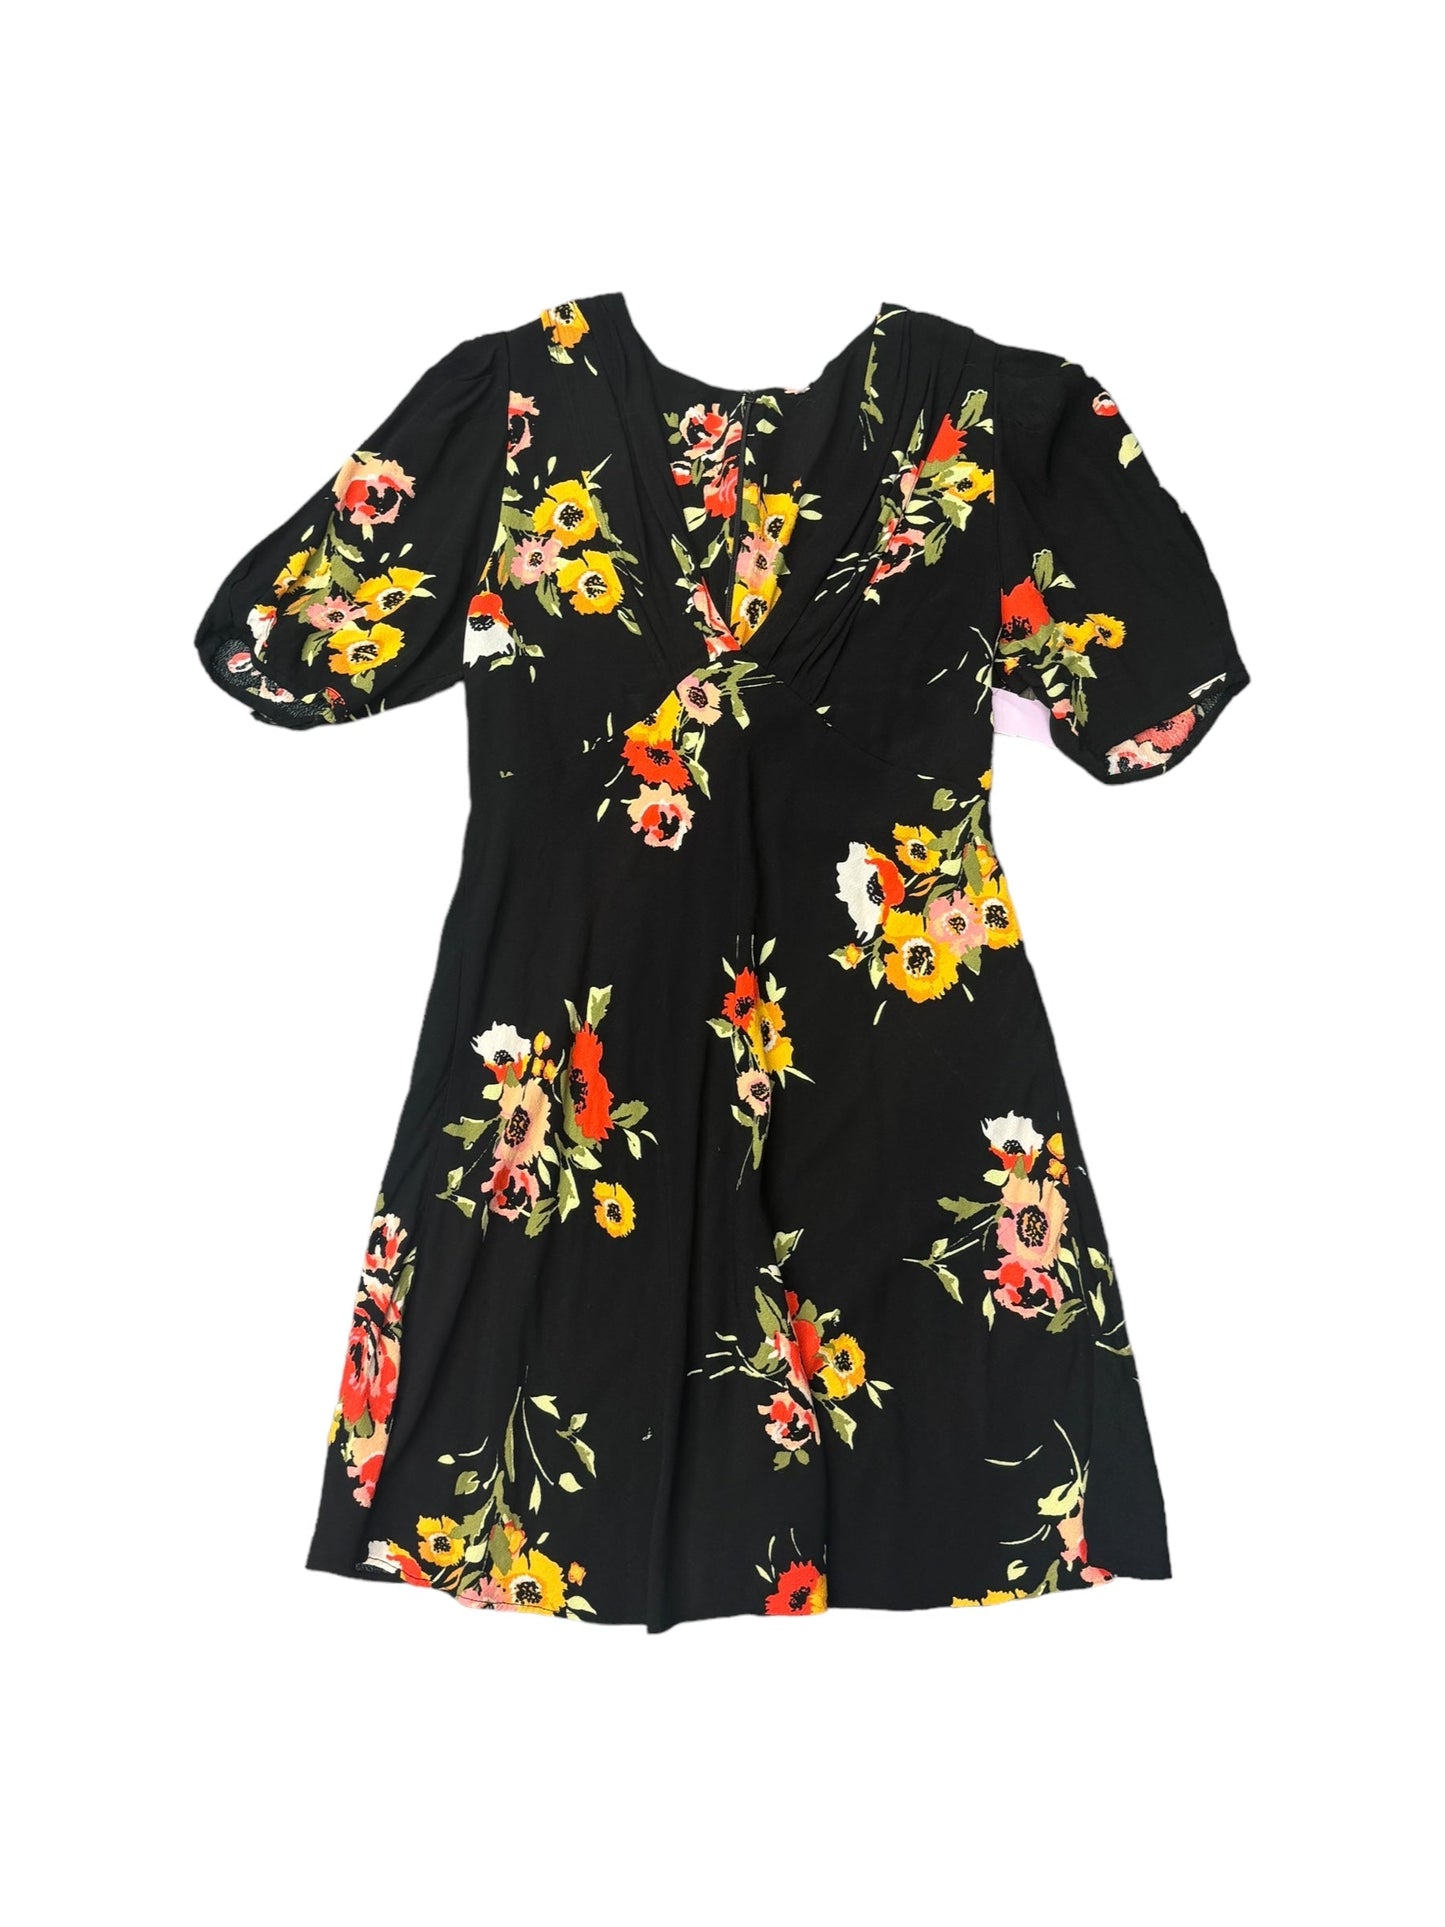 Floral Print Dress Casual Midi Free People, Size 8